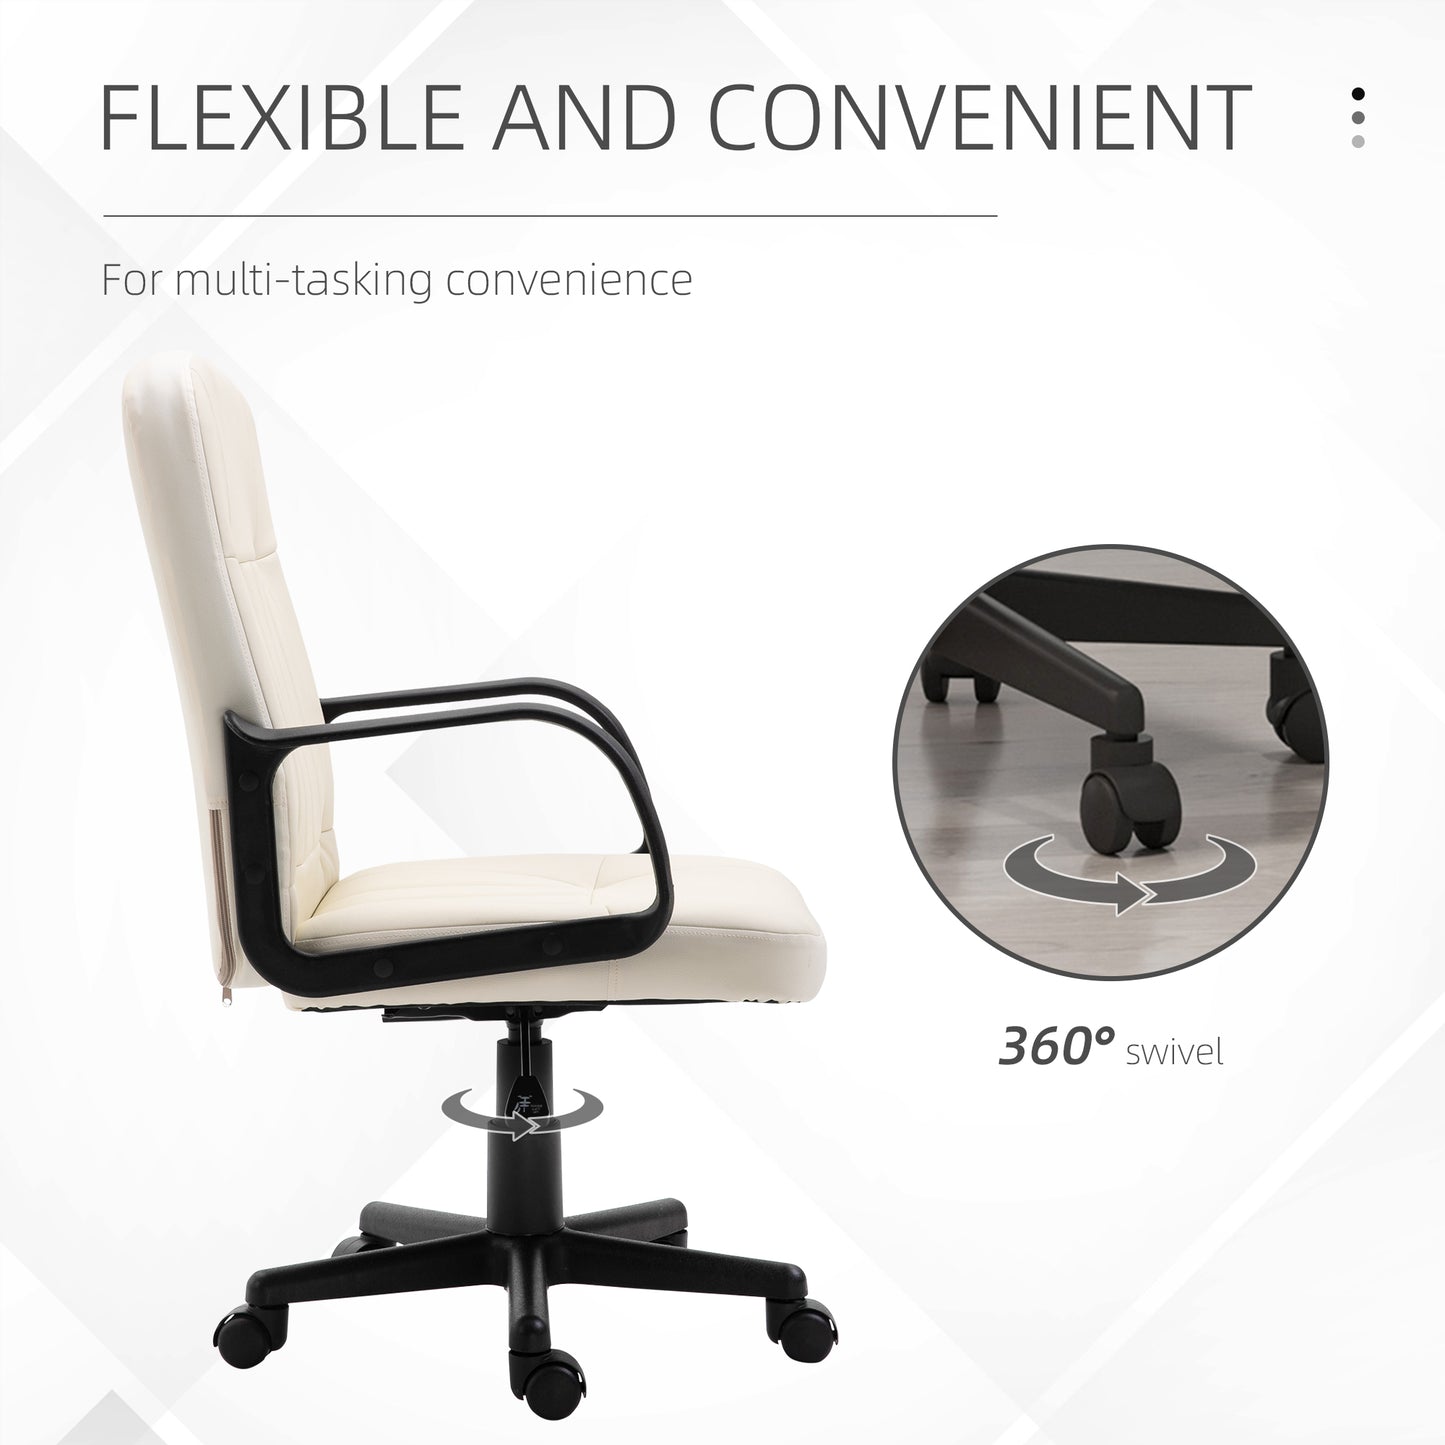 Swivel Executive Office Chair Home, Office Mid Back PU Leather Computer Desk Chair for Adults, Wheels, Cream, HOMCOM, 5